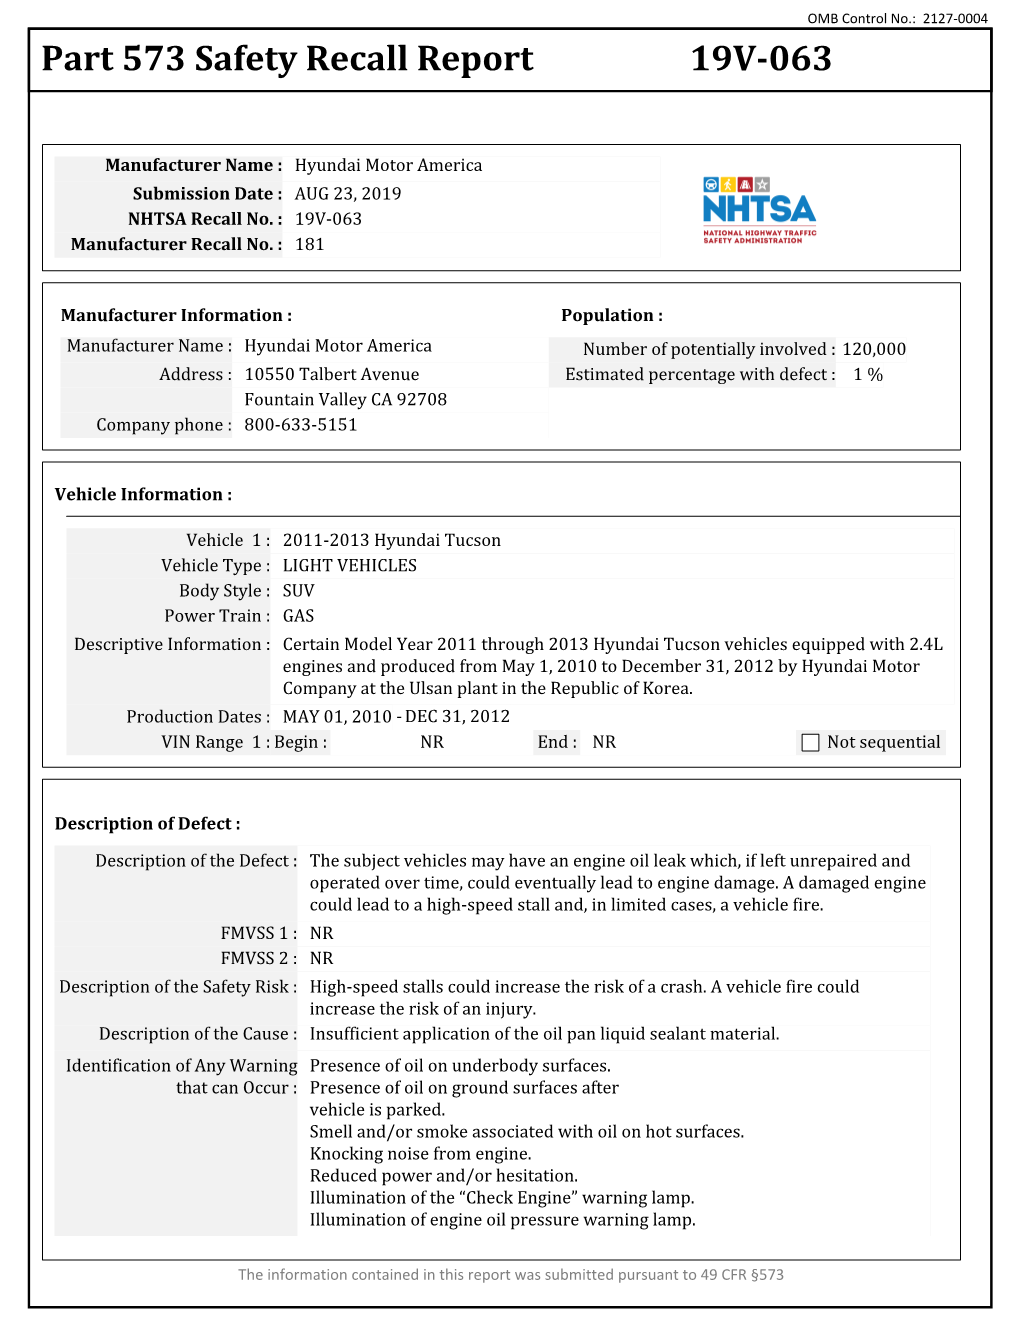 Part 573 Safety Recall Report 19V-063